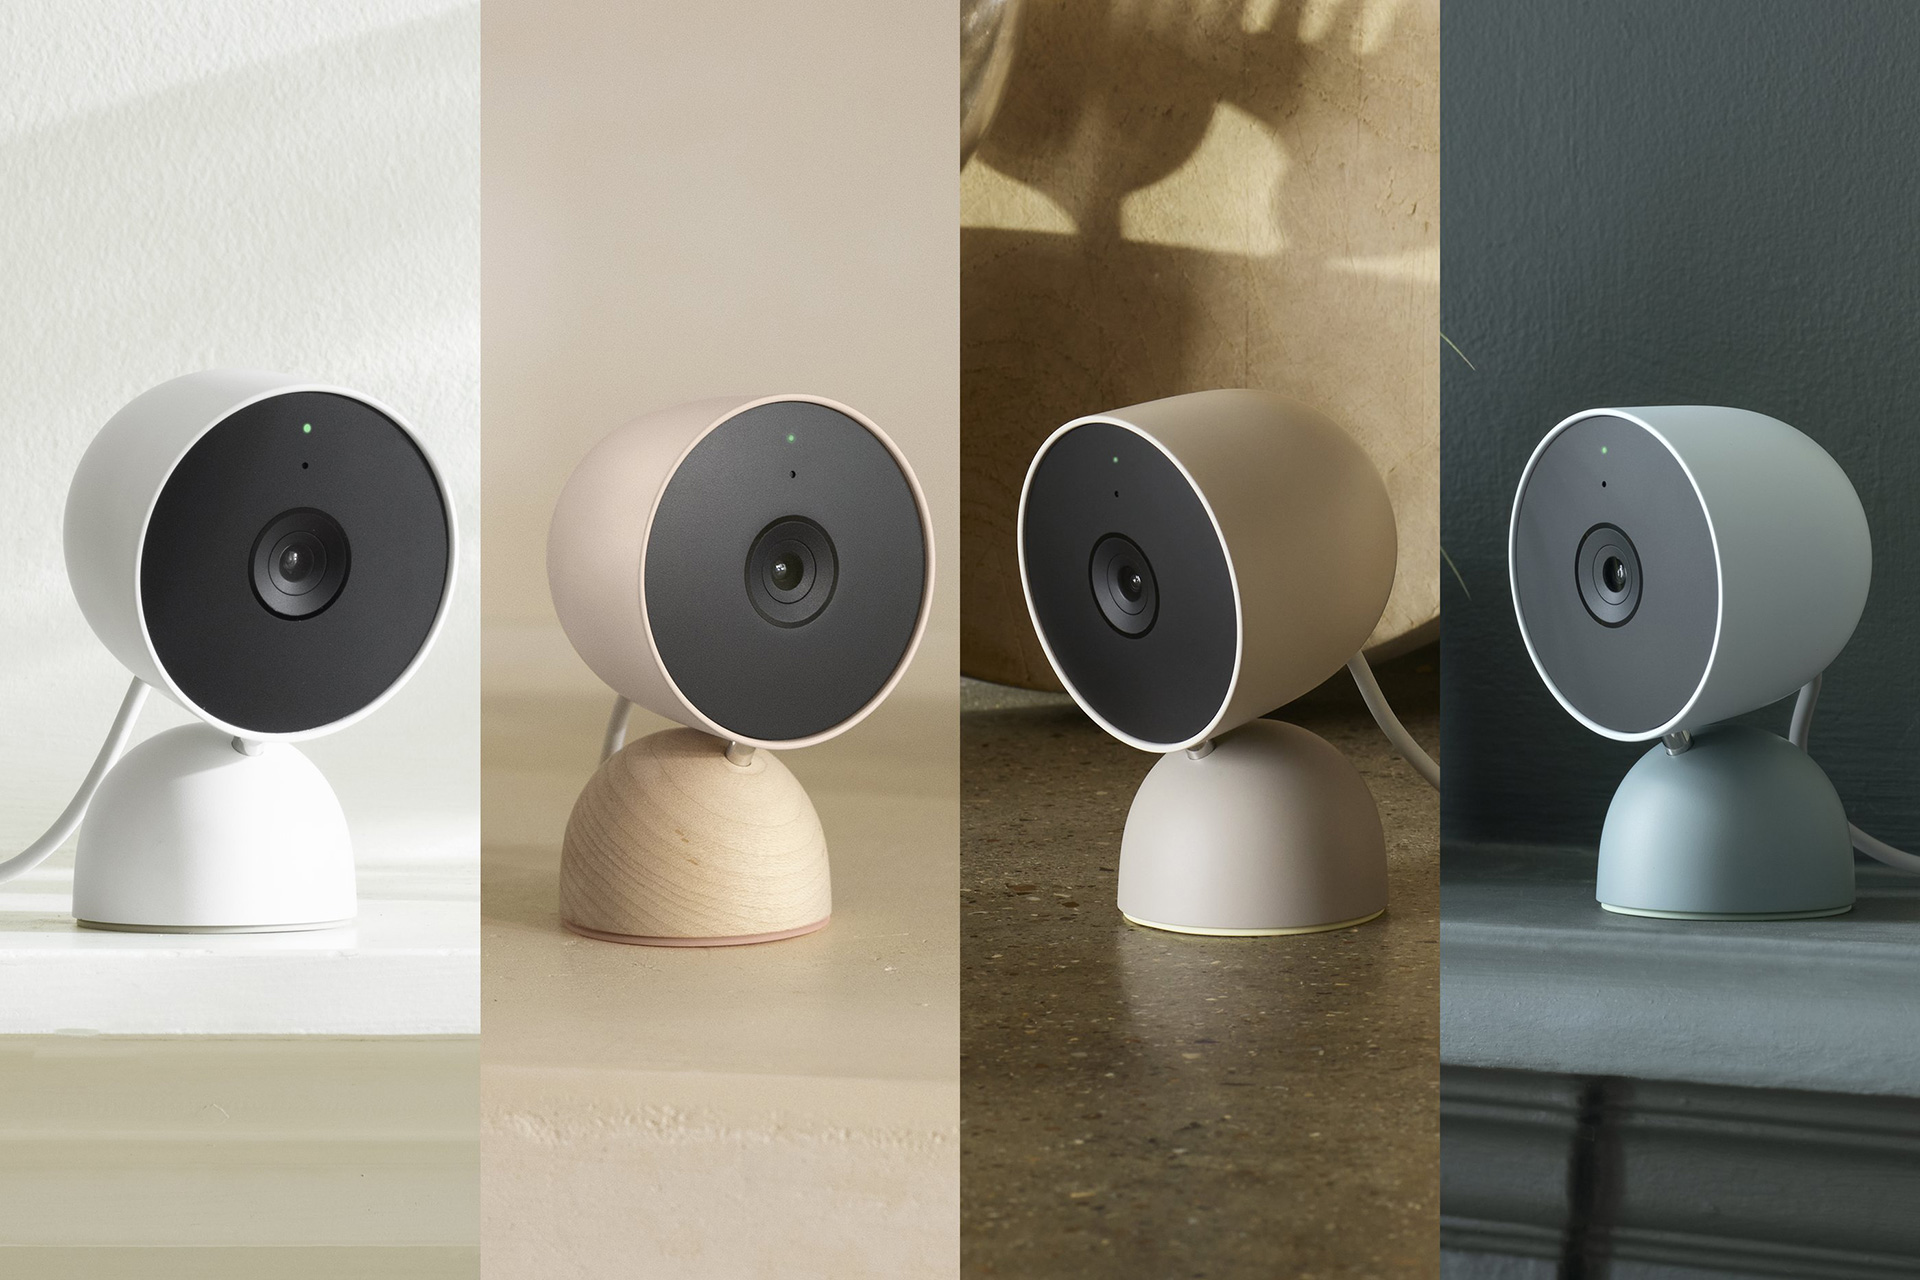 Google finally lets you view its latest Nest cameras on the web